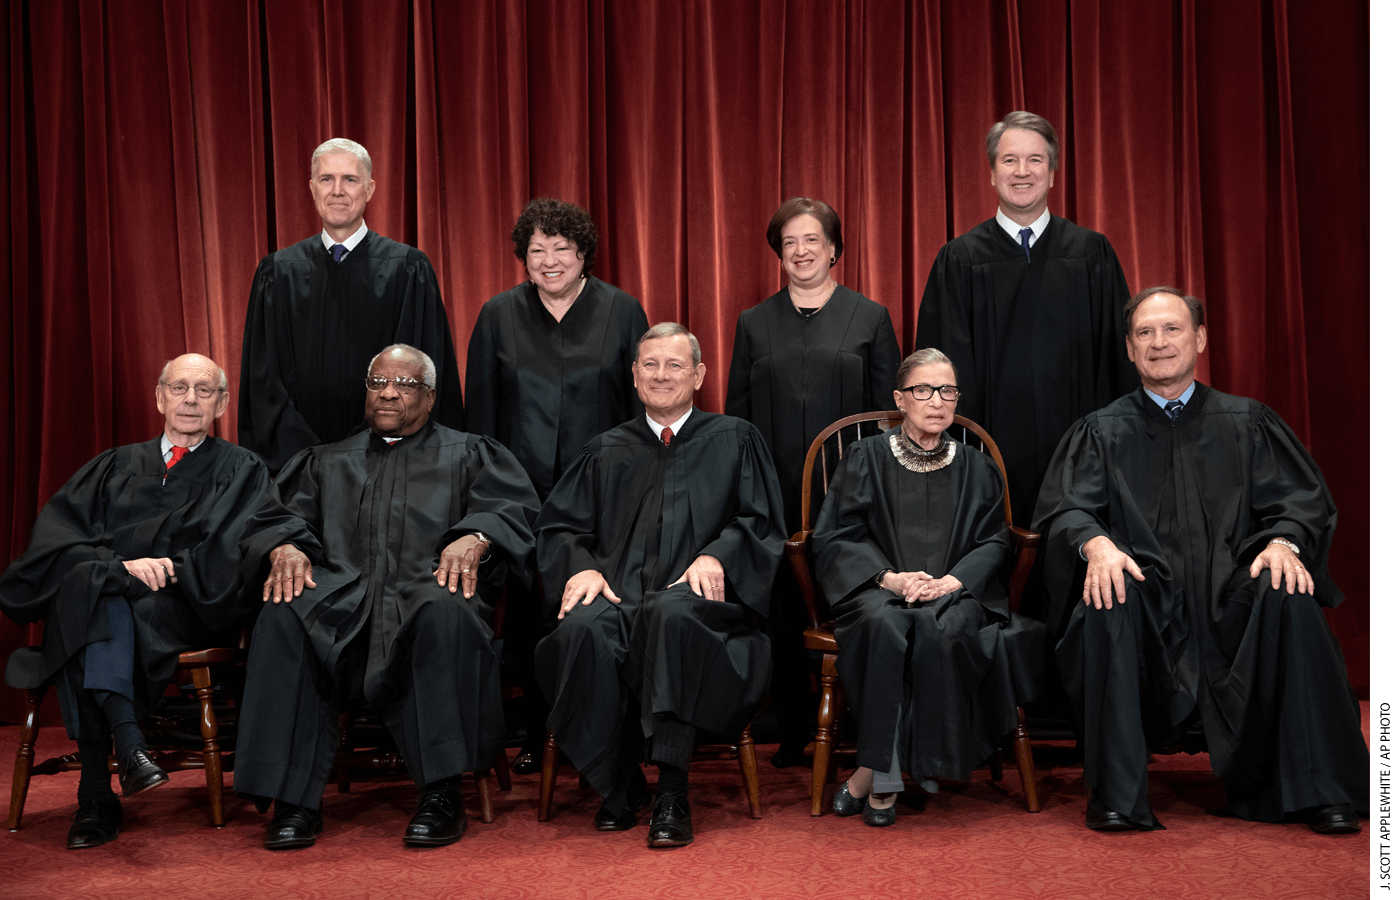 The justices of the U.S. Supreme Court.